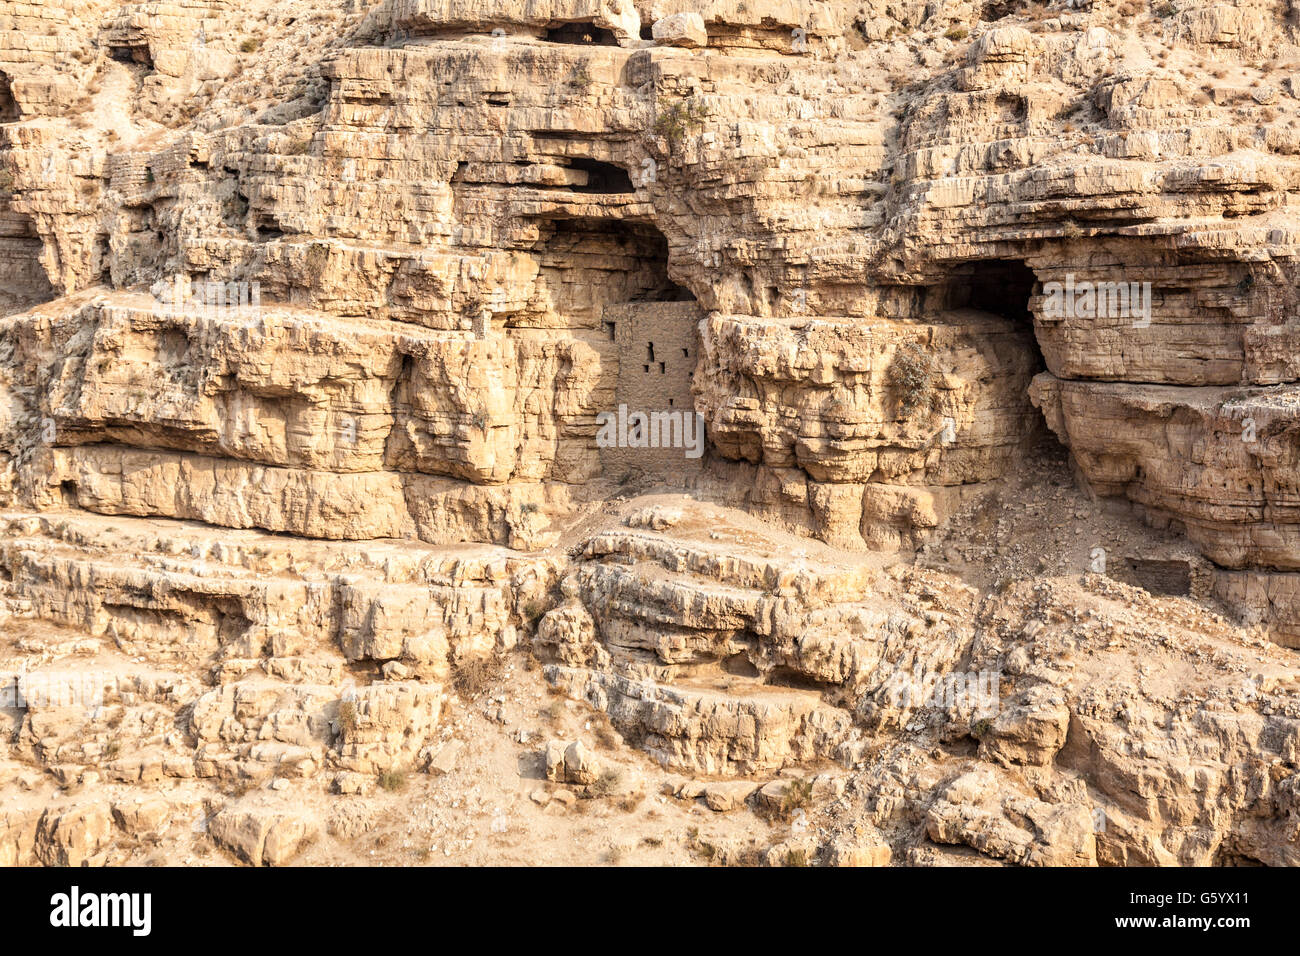 Judean desert east from Jerusalem and west from Dead Sea with Kidron Valley and Mar Saba Monastery in Palestine and Israel. Stock Photo